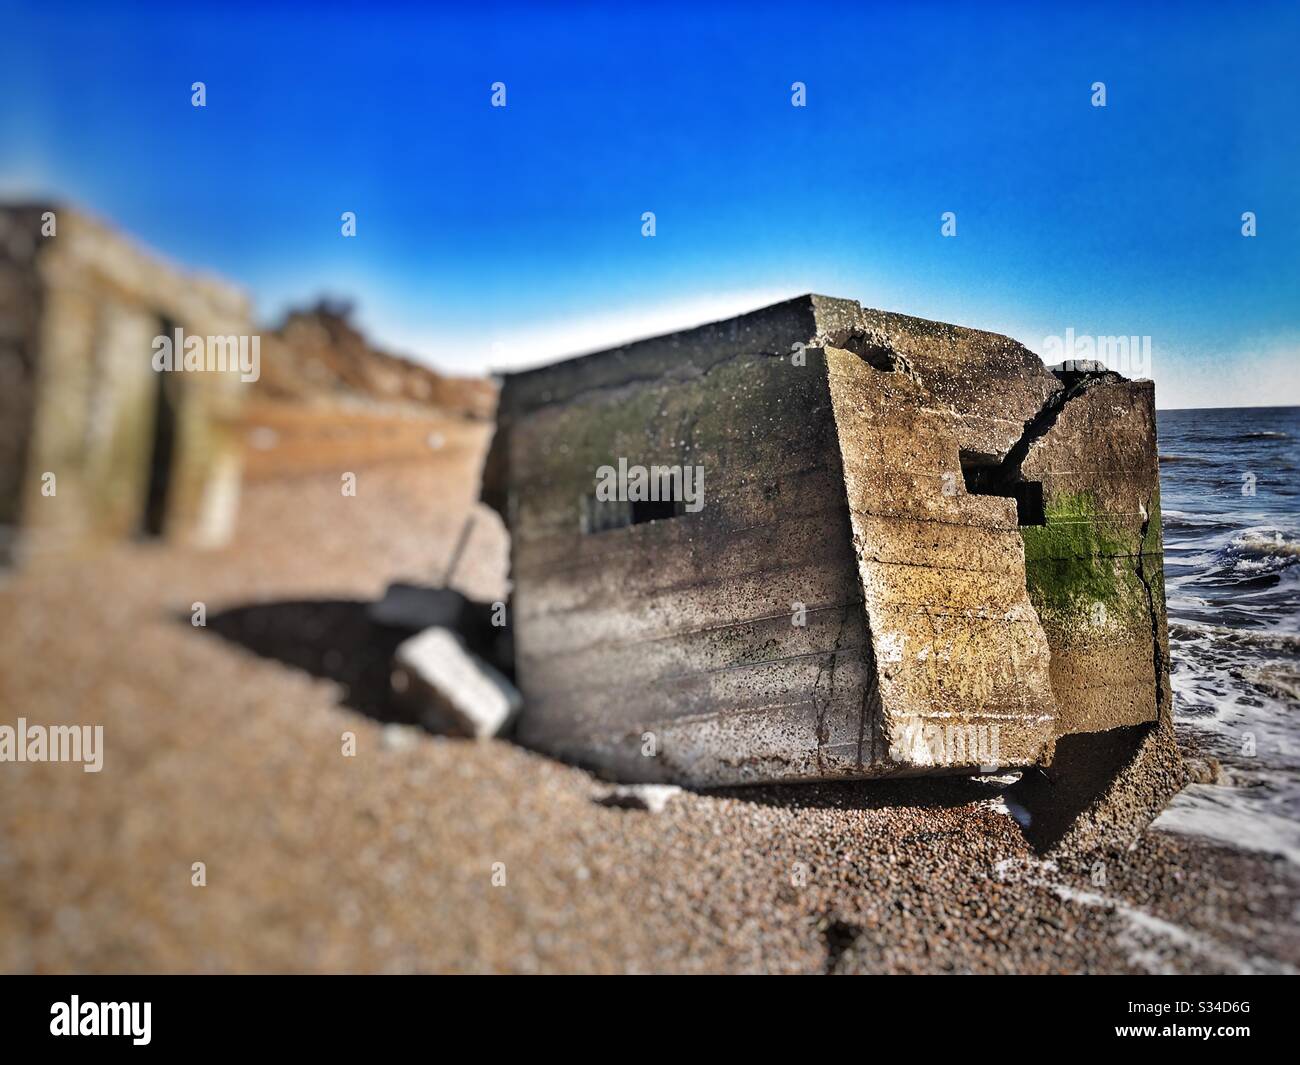 Wartime defences on the beach due to the effects of coastal erosion, Bawdsey, Suffolk, England. Stock Photo